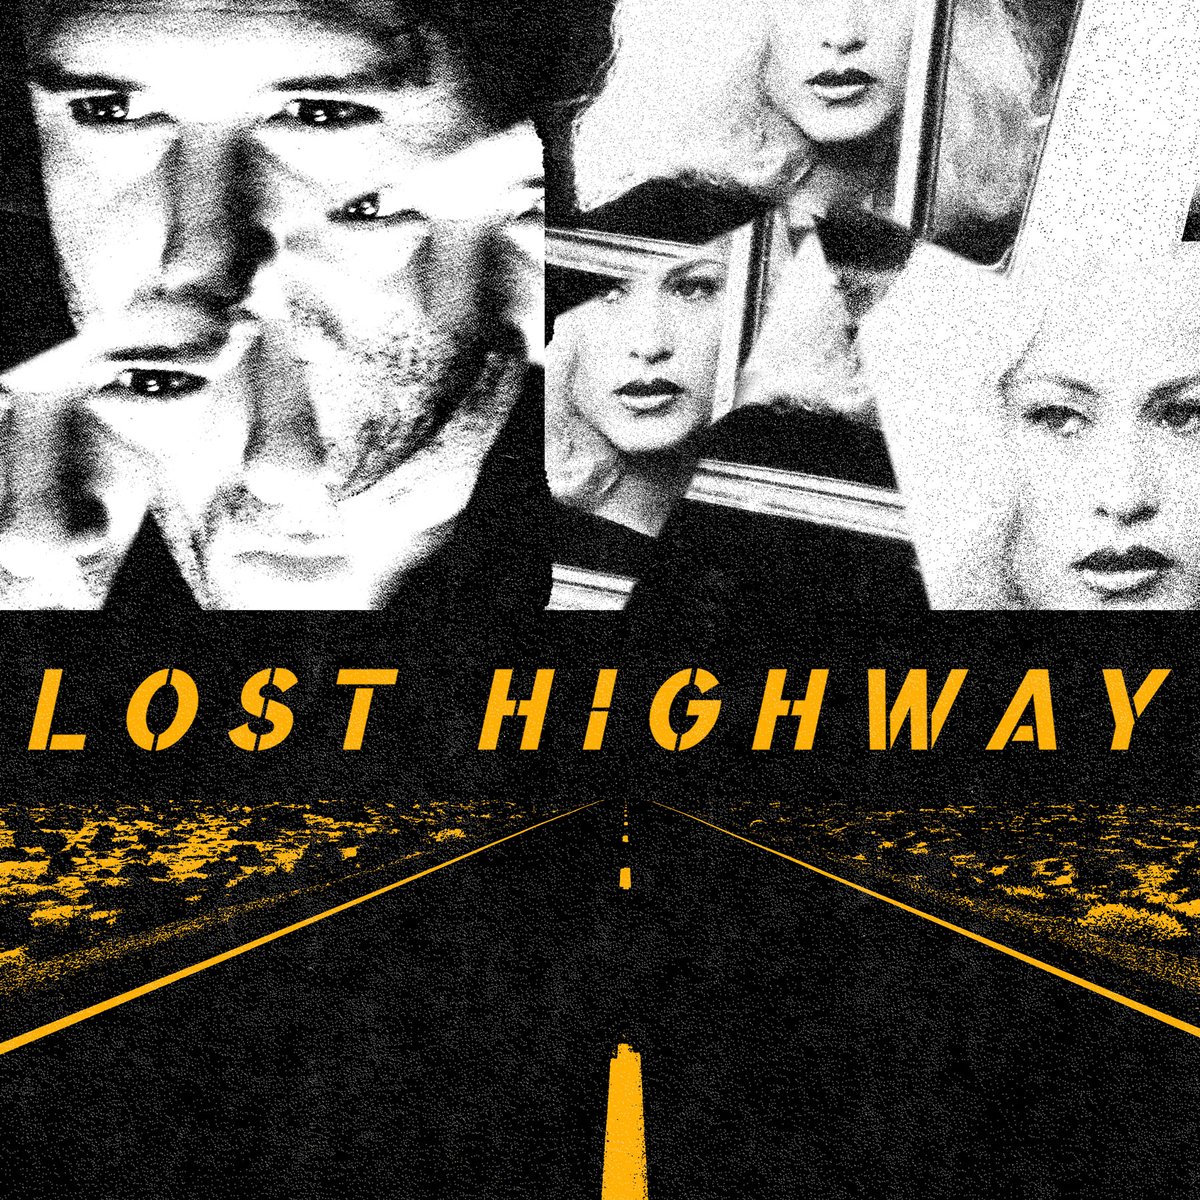 My next book will come out in Spring 2023. It covers David Lynch's 1997 Lost Highway film. I have interviewed Patricia Arquette, Balthazar Getty, Natasha Wagner, Deepak Nayar, Peter Deming, Sabrina Sutherland, Scott Ressler and Debbie Zoller Preorder: tuckerdspress.com/product-page/l…